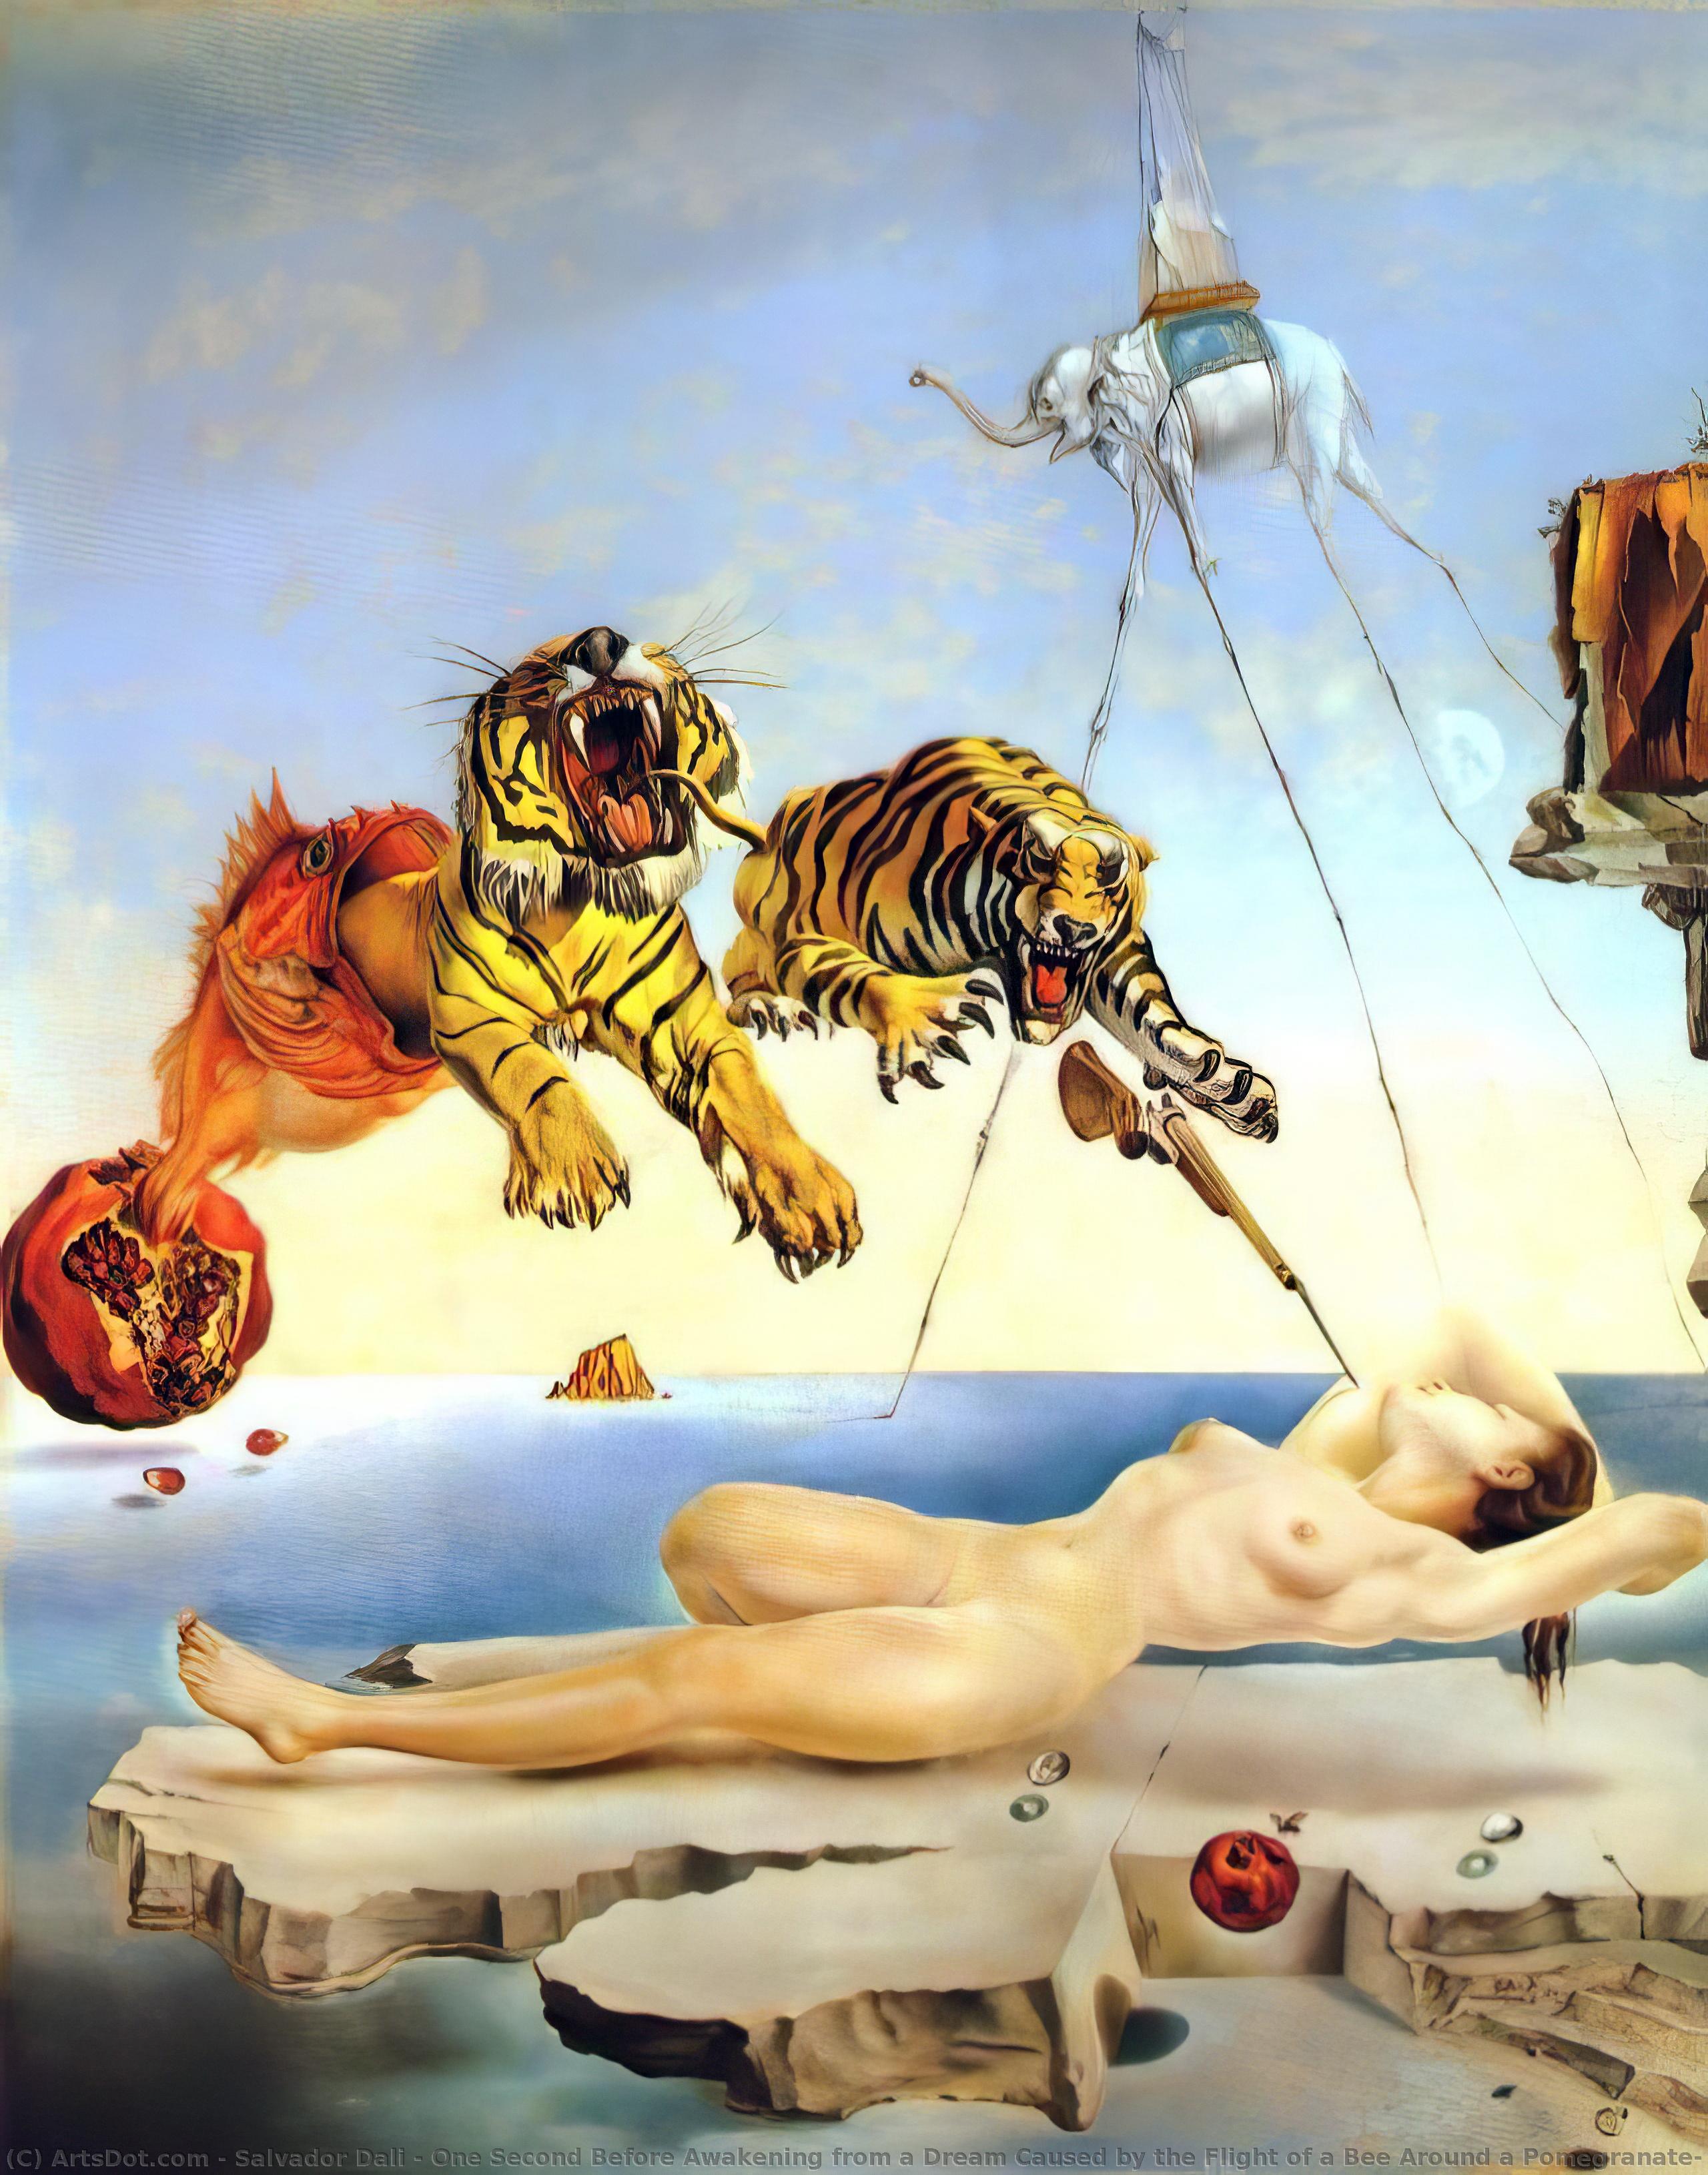 WikiOO.org - Encyclopedia of Fine Arts - Malba, Artwork Salvador Dali - One Second Before Awakening from a Dream Caused by the Flight of a Bee Around a Pomegranate, 1944